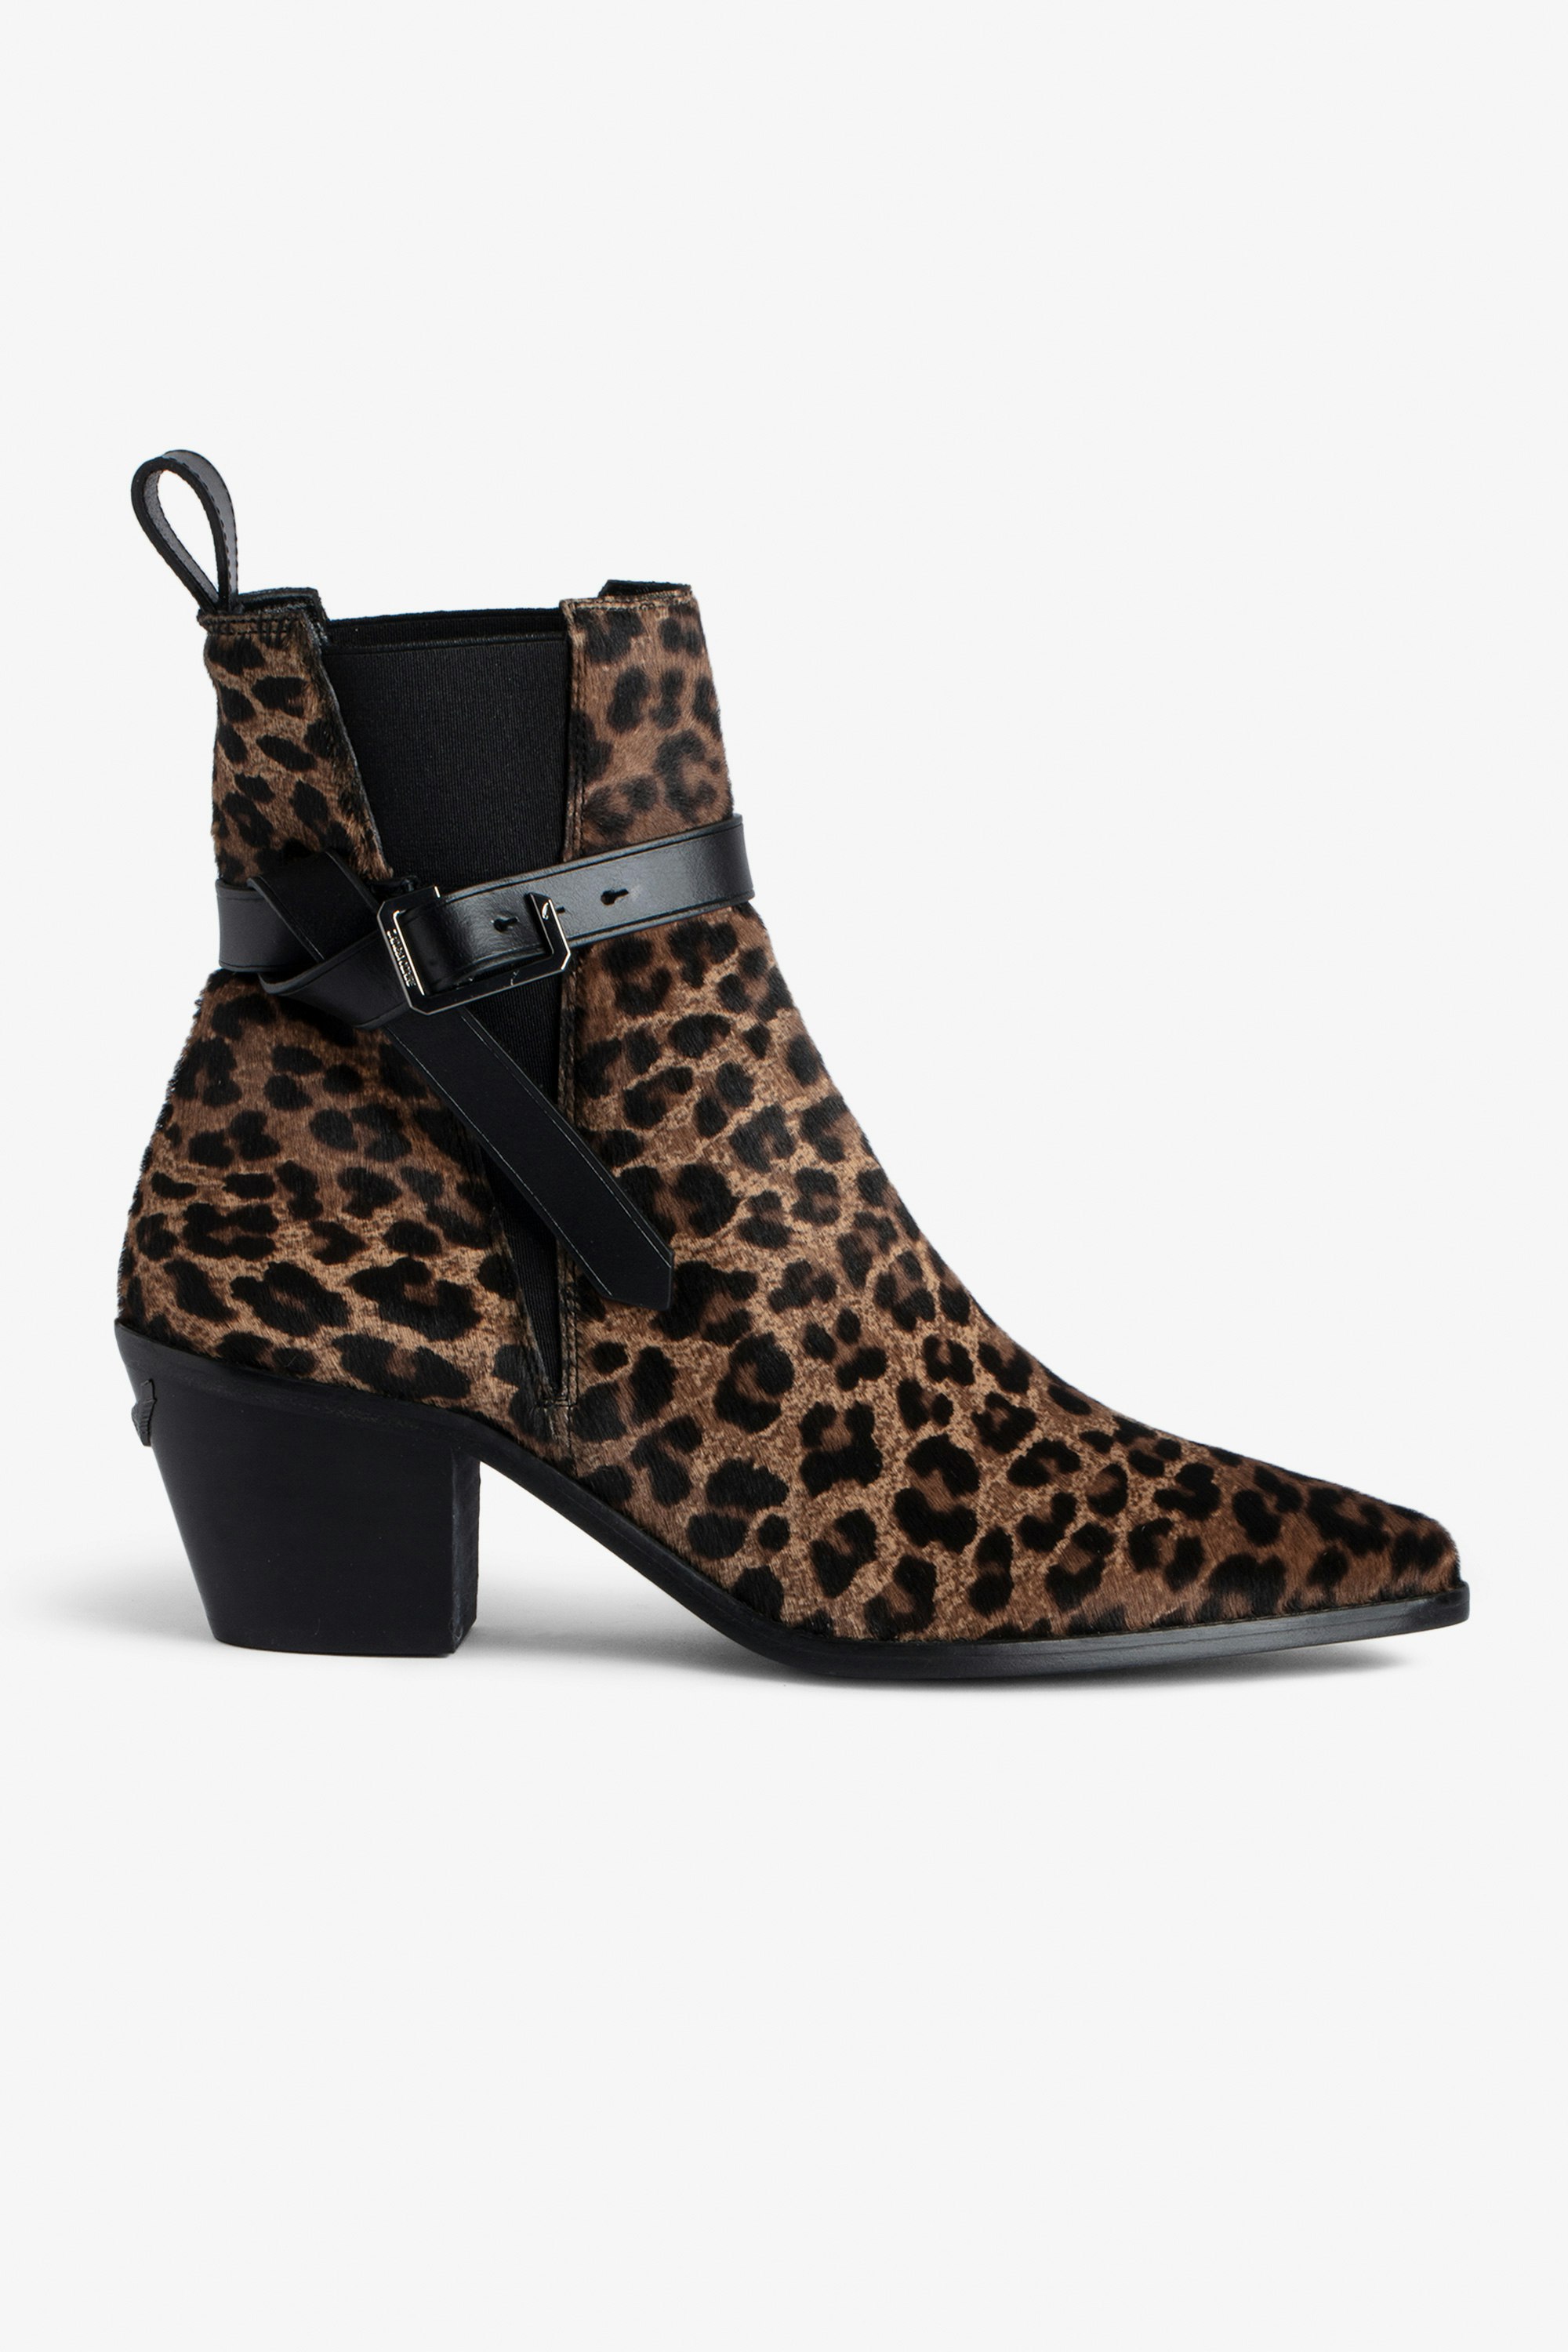 Tyler Ankle Boots Women’s leopard-print brown leather ankle boots with C buckle.